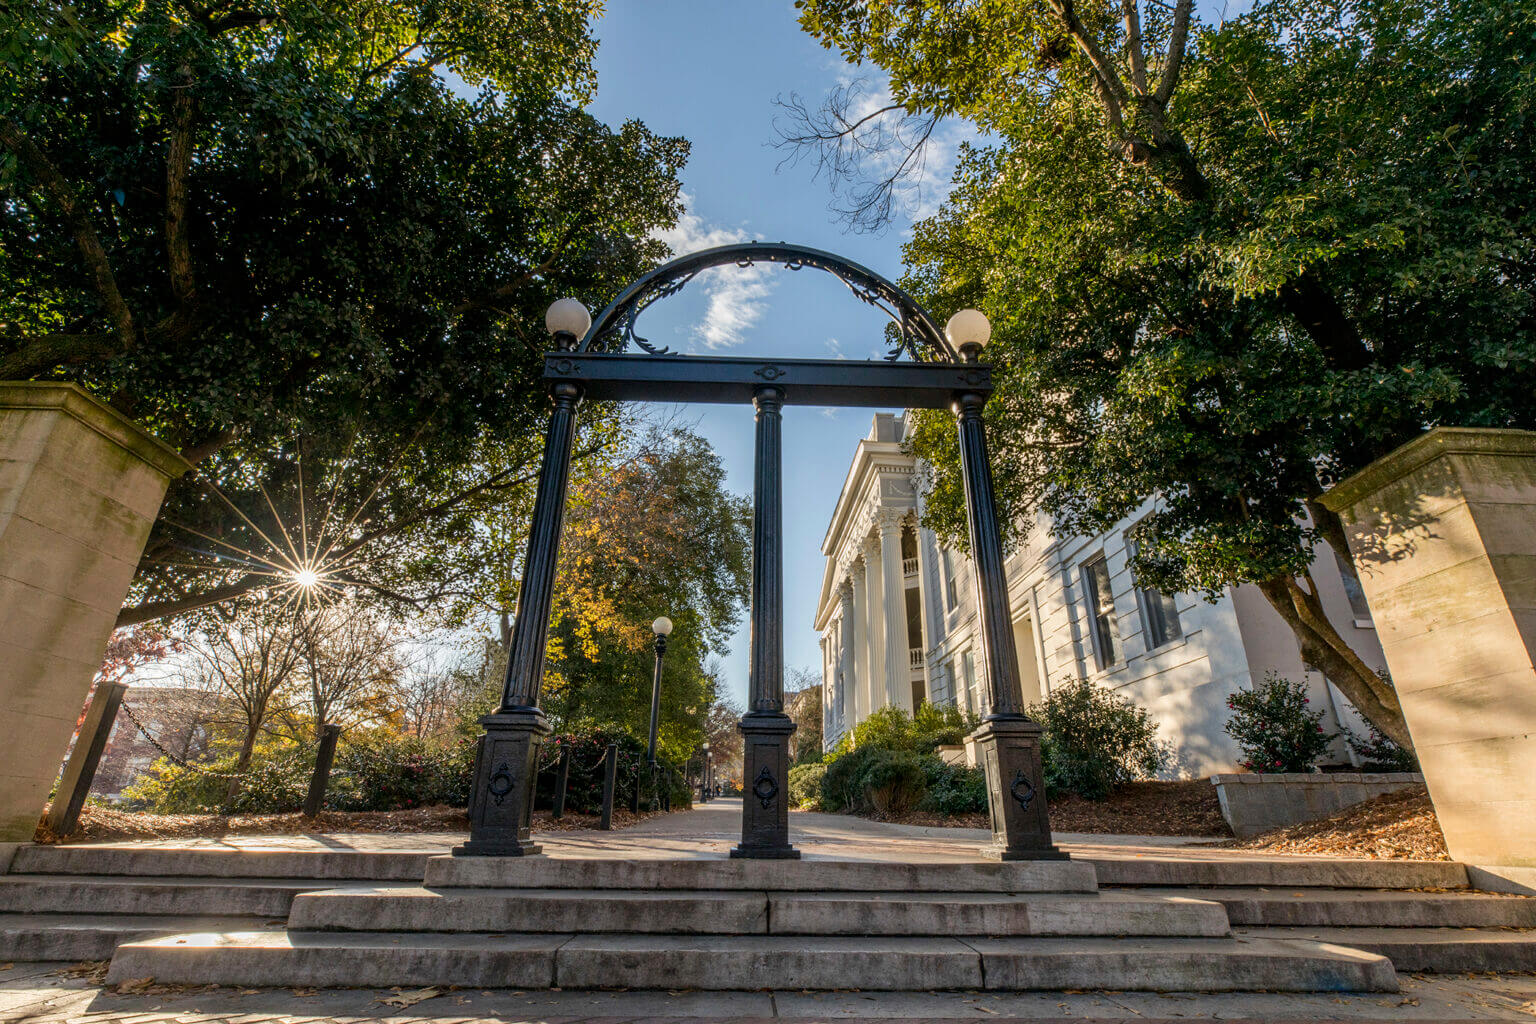 Eleven grants totaling $1.5 million were awarded in November 2021 to recipients of the third round of Presidential Interdisciplinary Seed Grants. Overall the awards went to faculty from 13 UGA departments, centers, programs, schools and colleges.